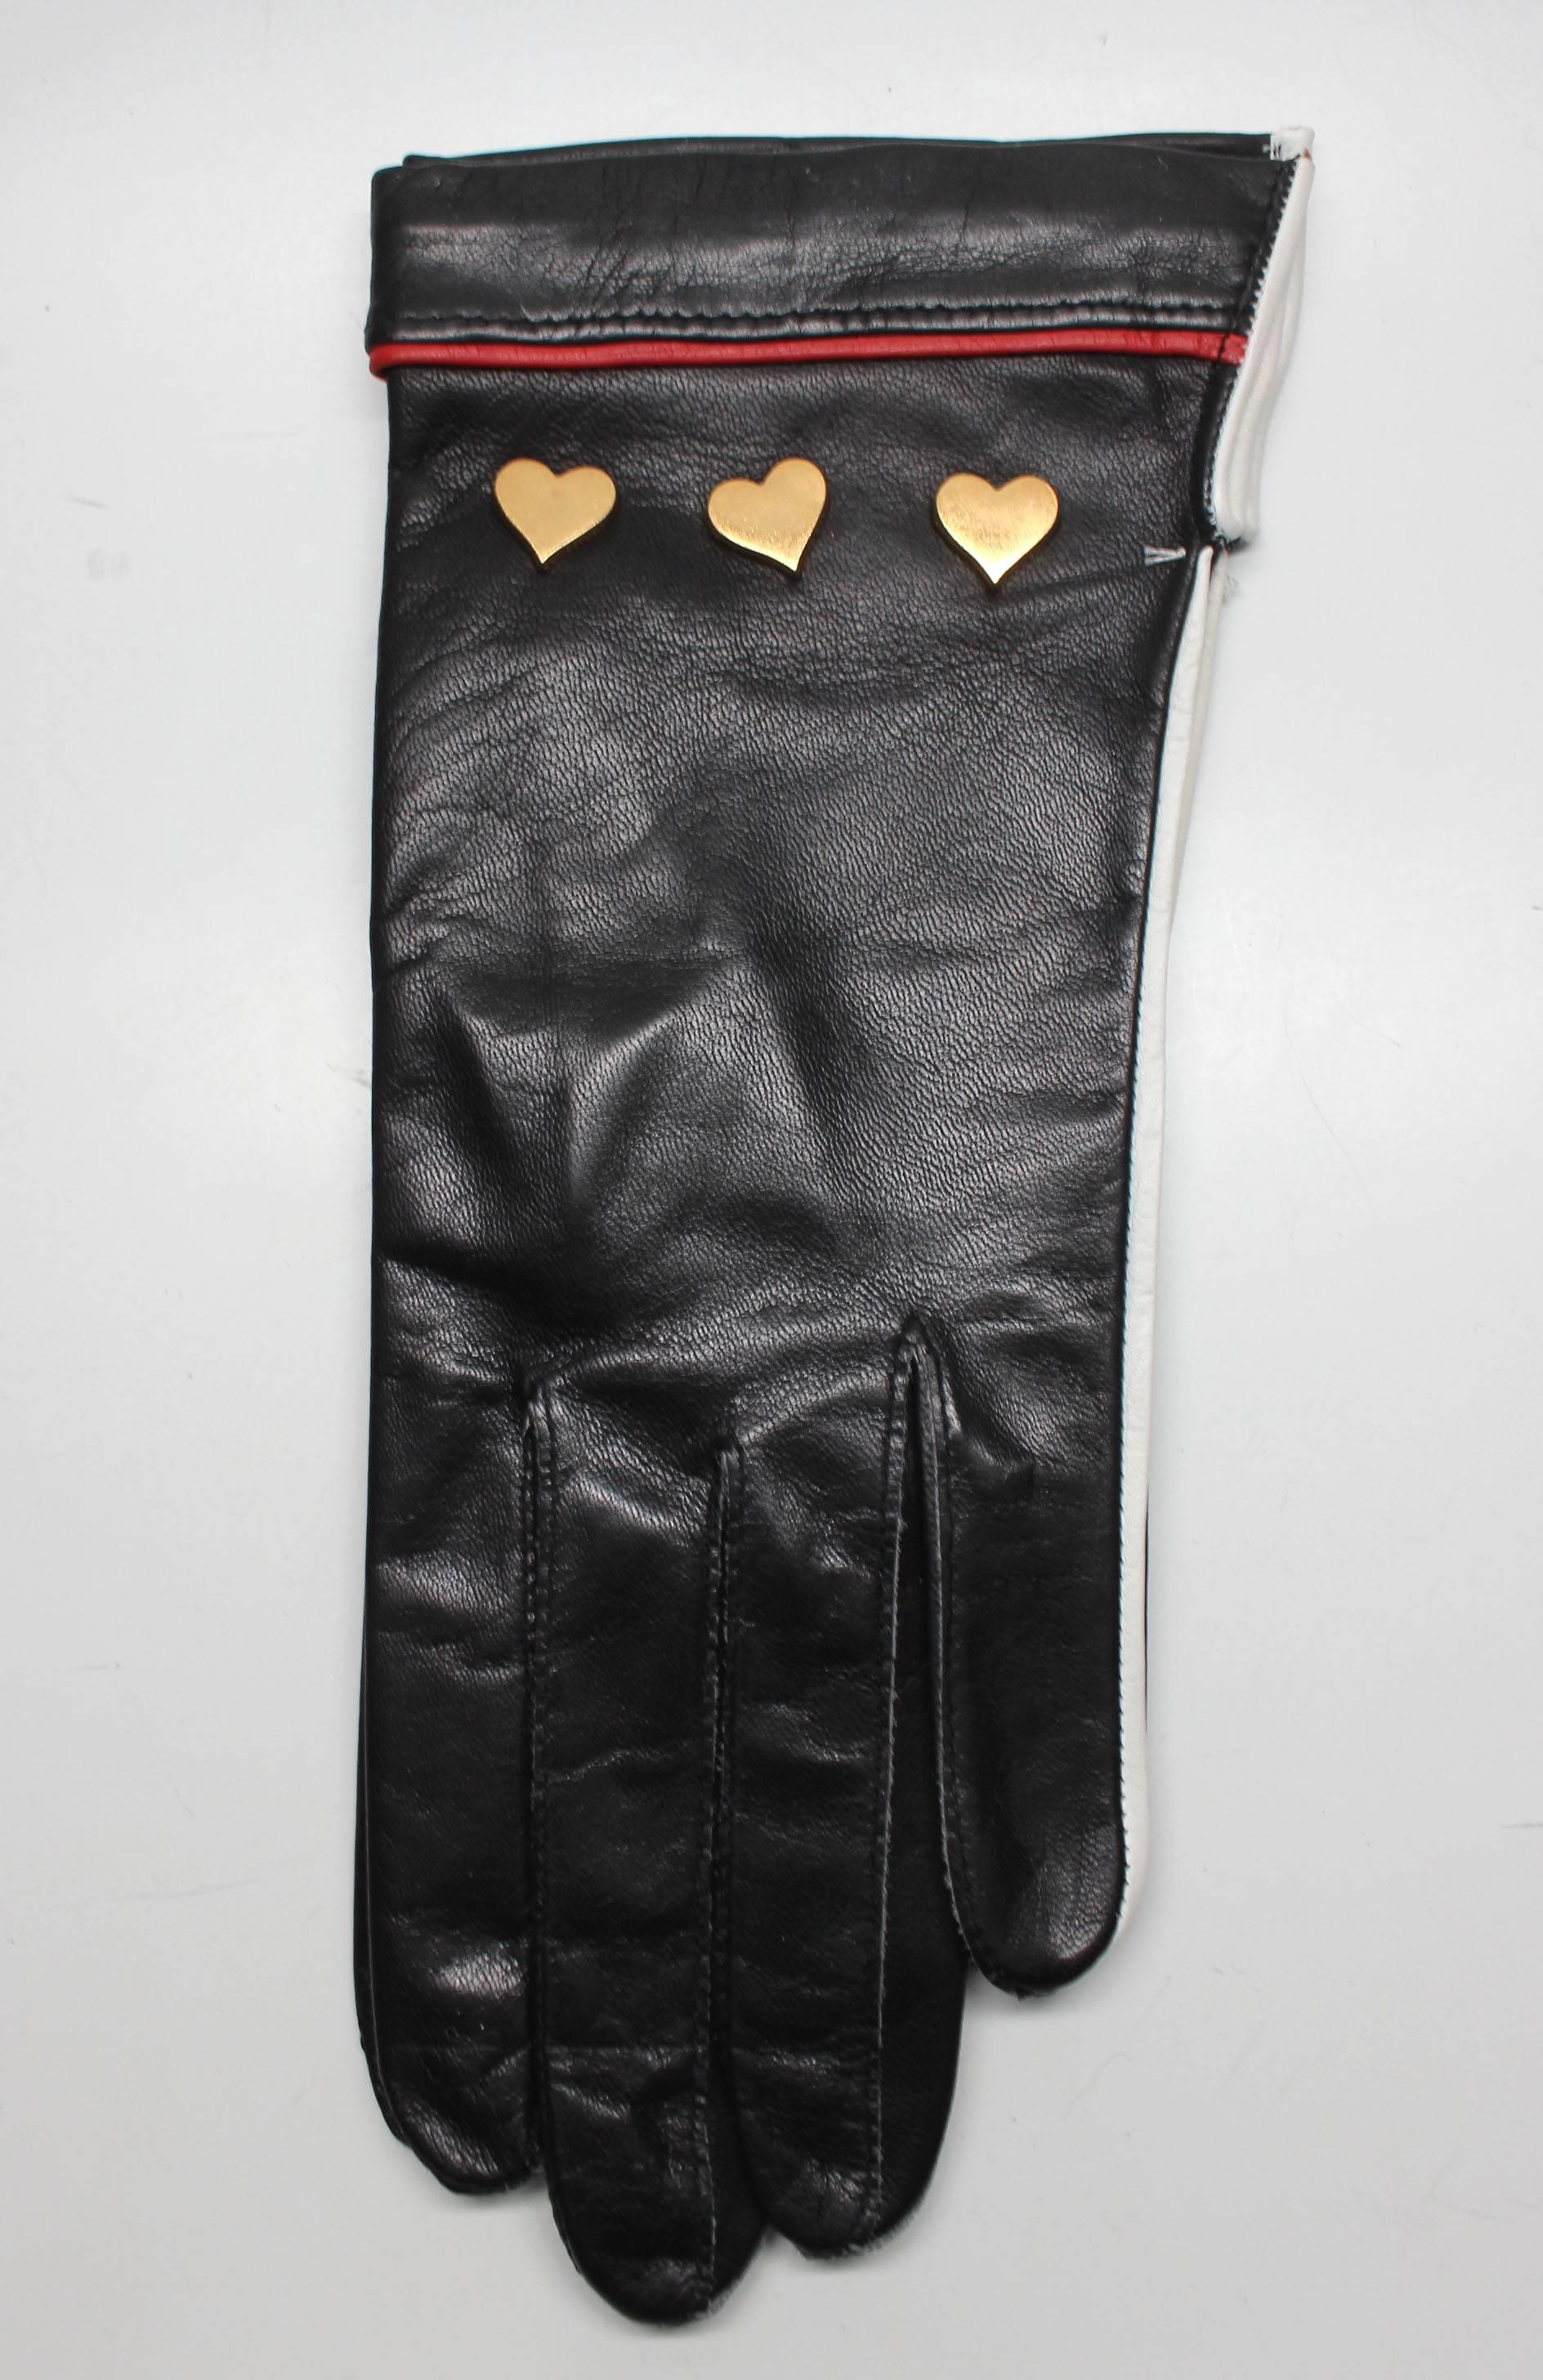 Women's Vintage 1980s Escada Black Leather Gloves with Heart Studs, Never Worn